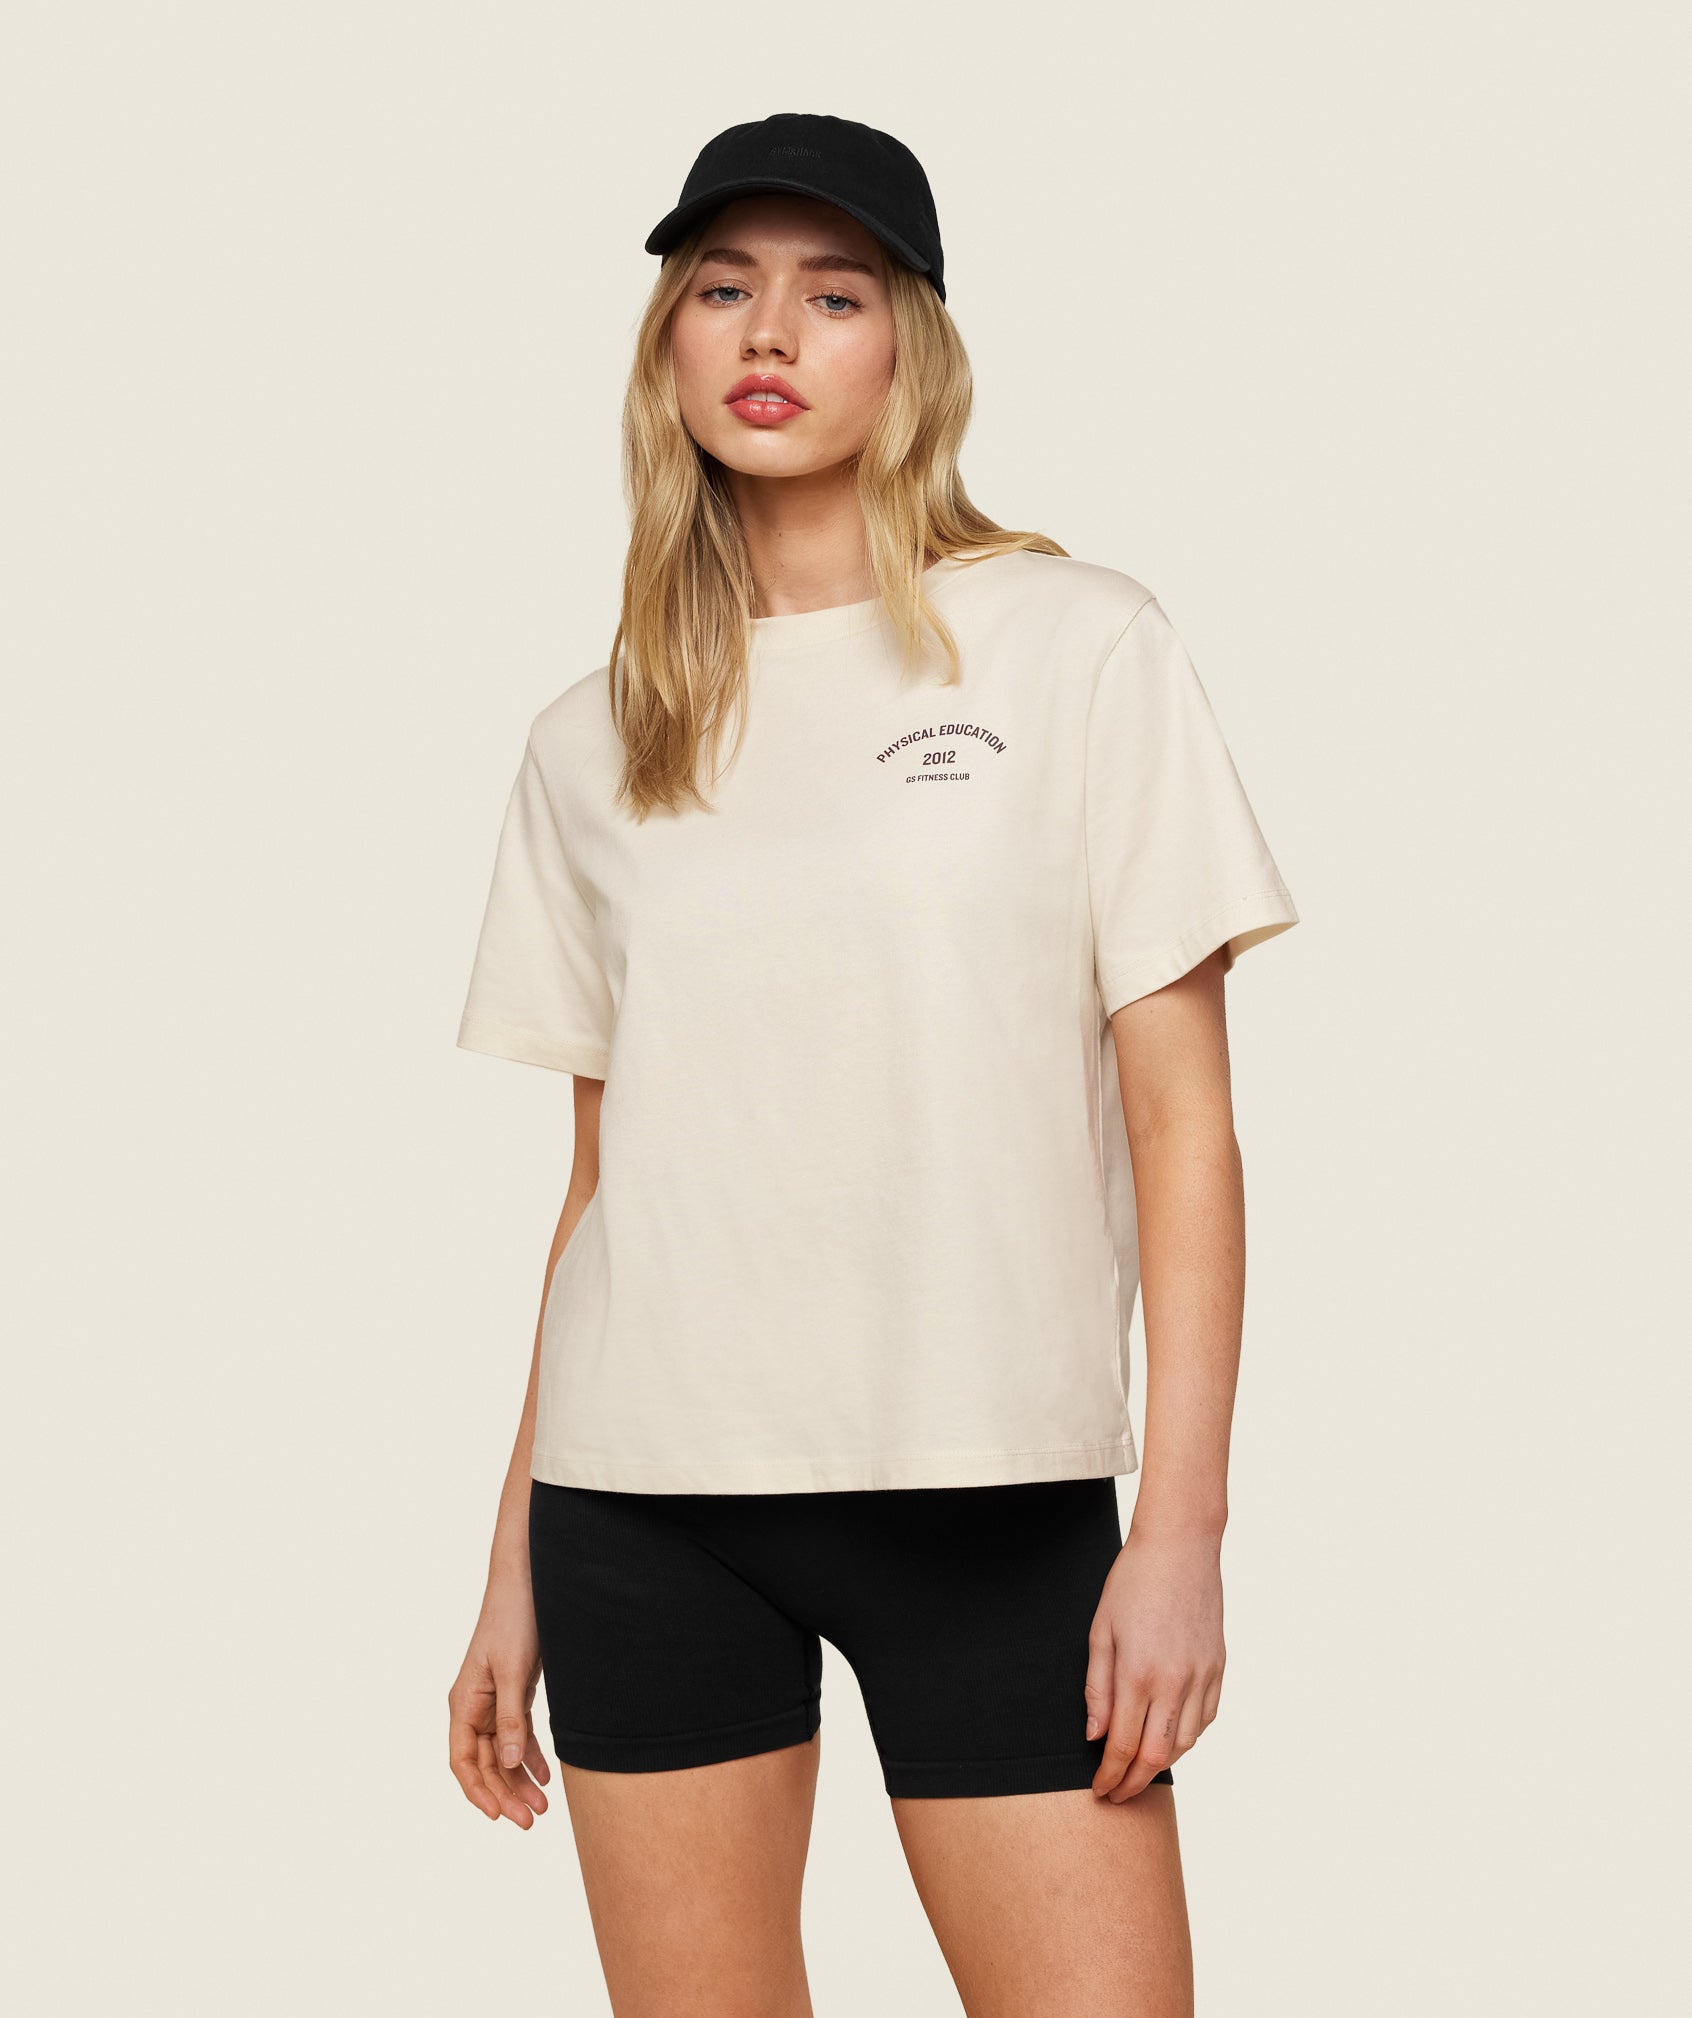 Phys Ed Graphic T-Shirt in Ecru White/Archive Brown - view 1